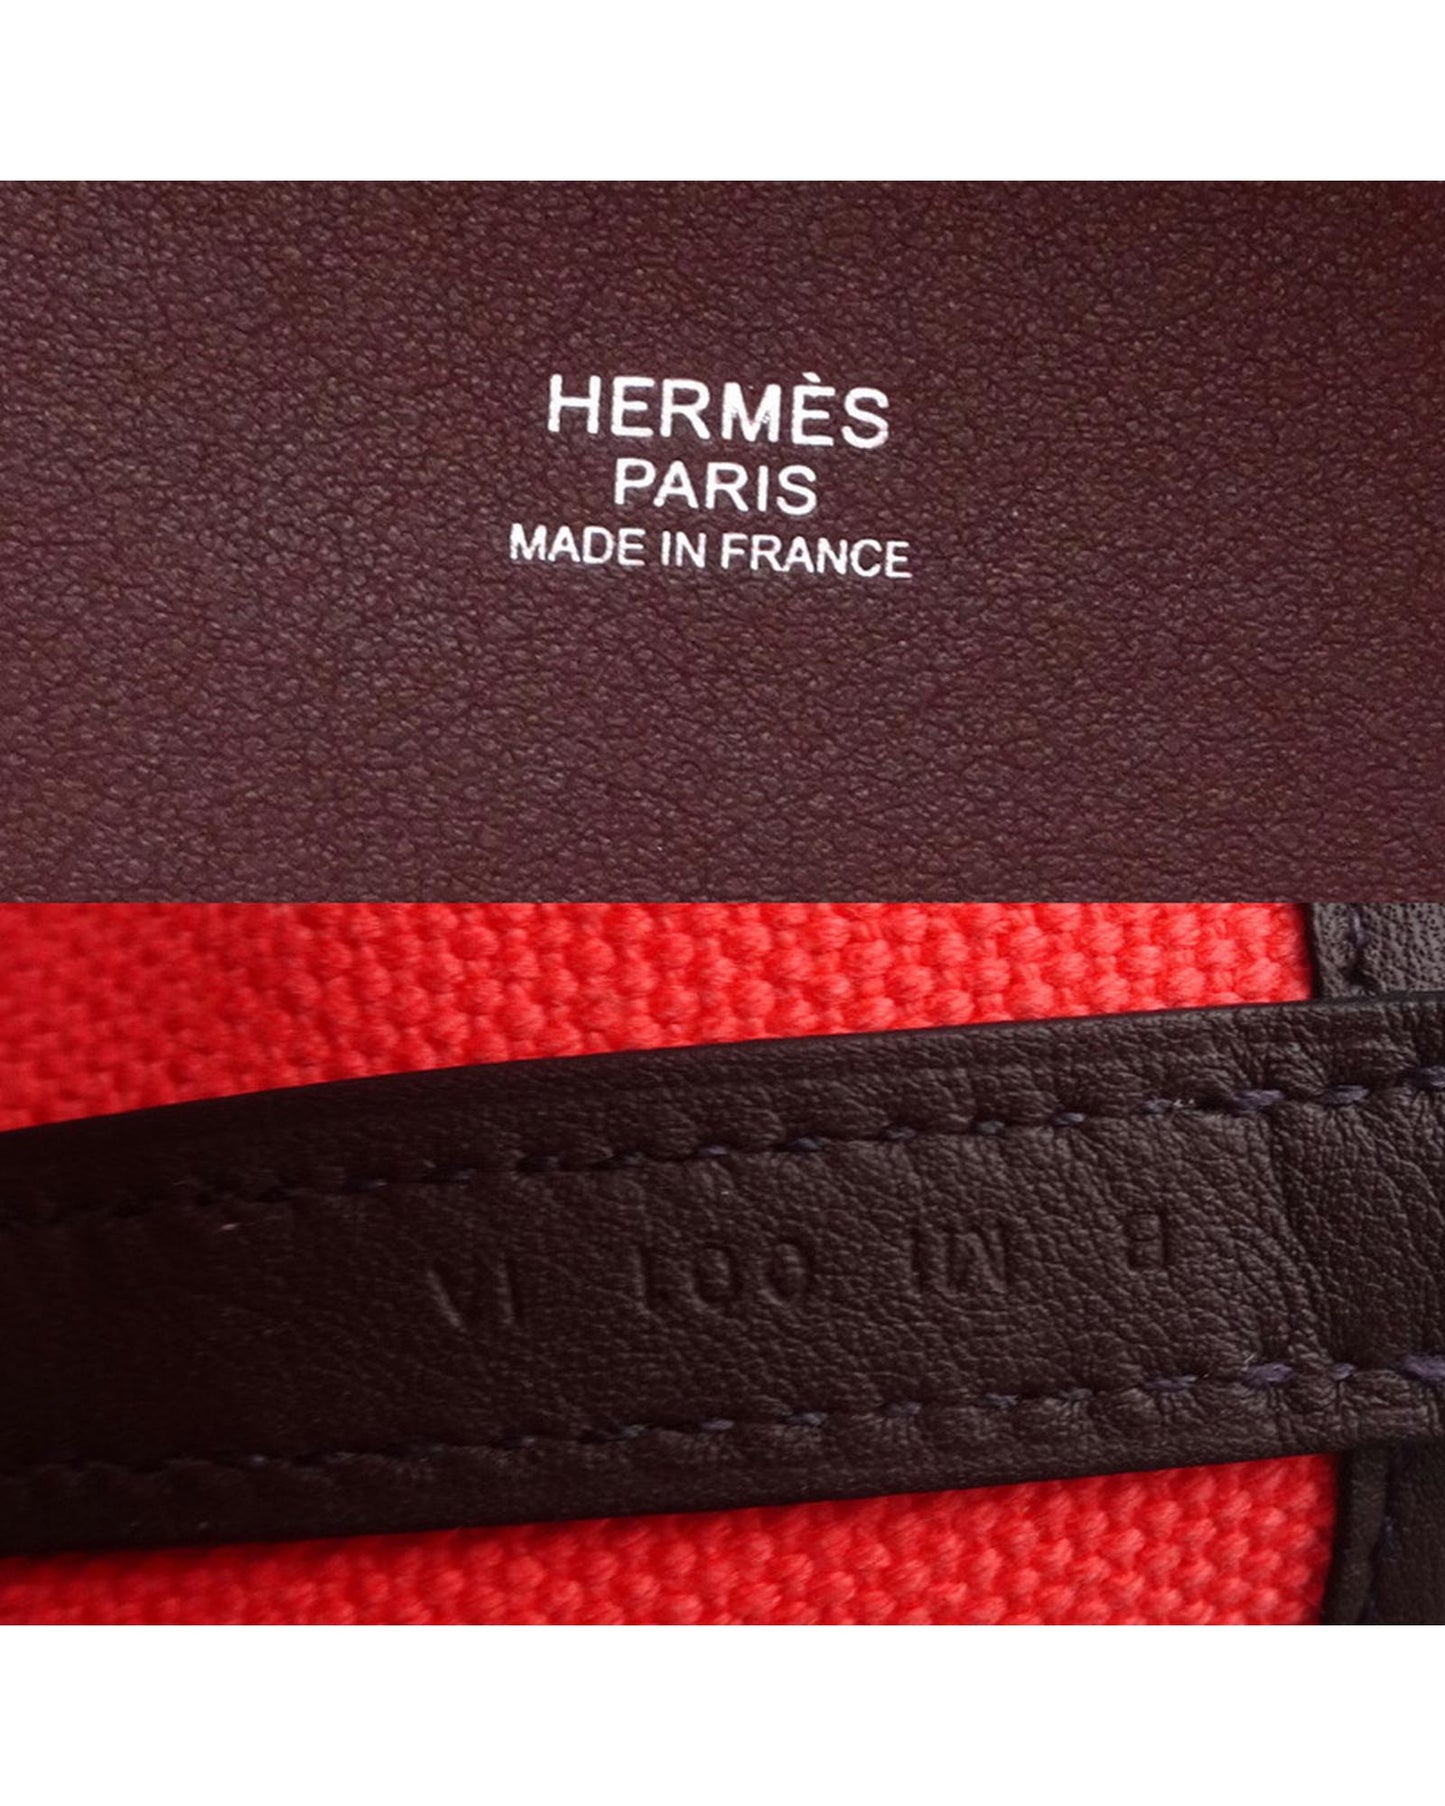 Hermes Women's Red Picotin Cargo Bag in Red